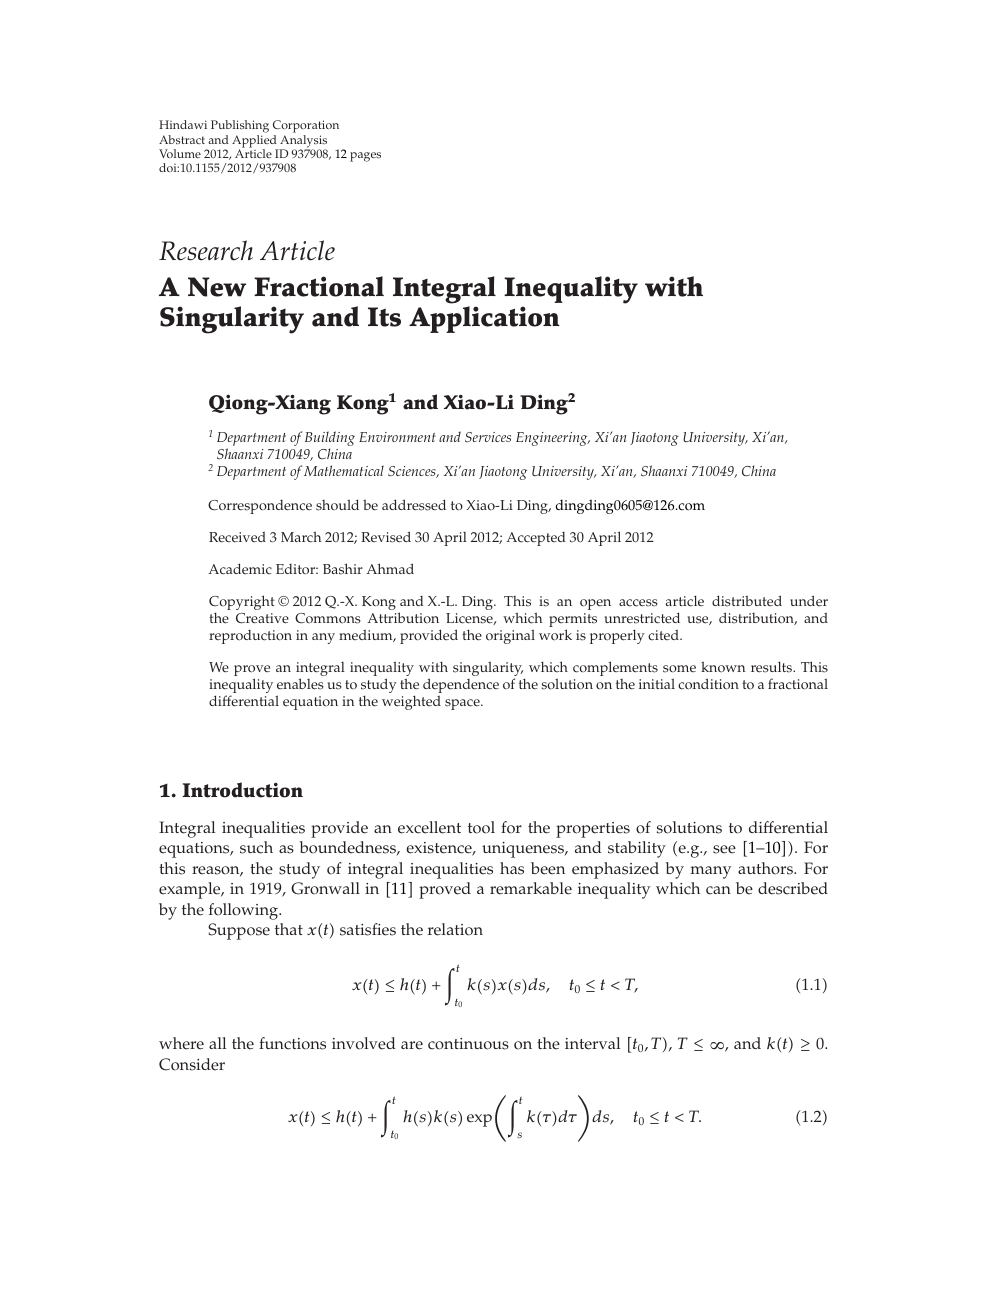 A New Fractional Integral Inequality With Singularity And Its Application Topic Of Research Paper In Mathematics Download Scholarly Article Pdf And Read For Free On Cyberleninka Open Science Hub